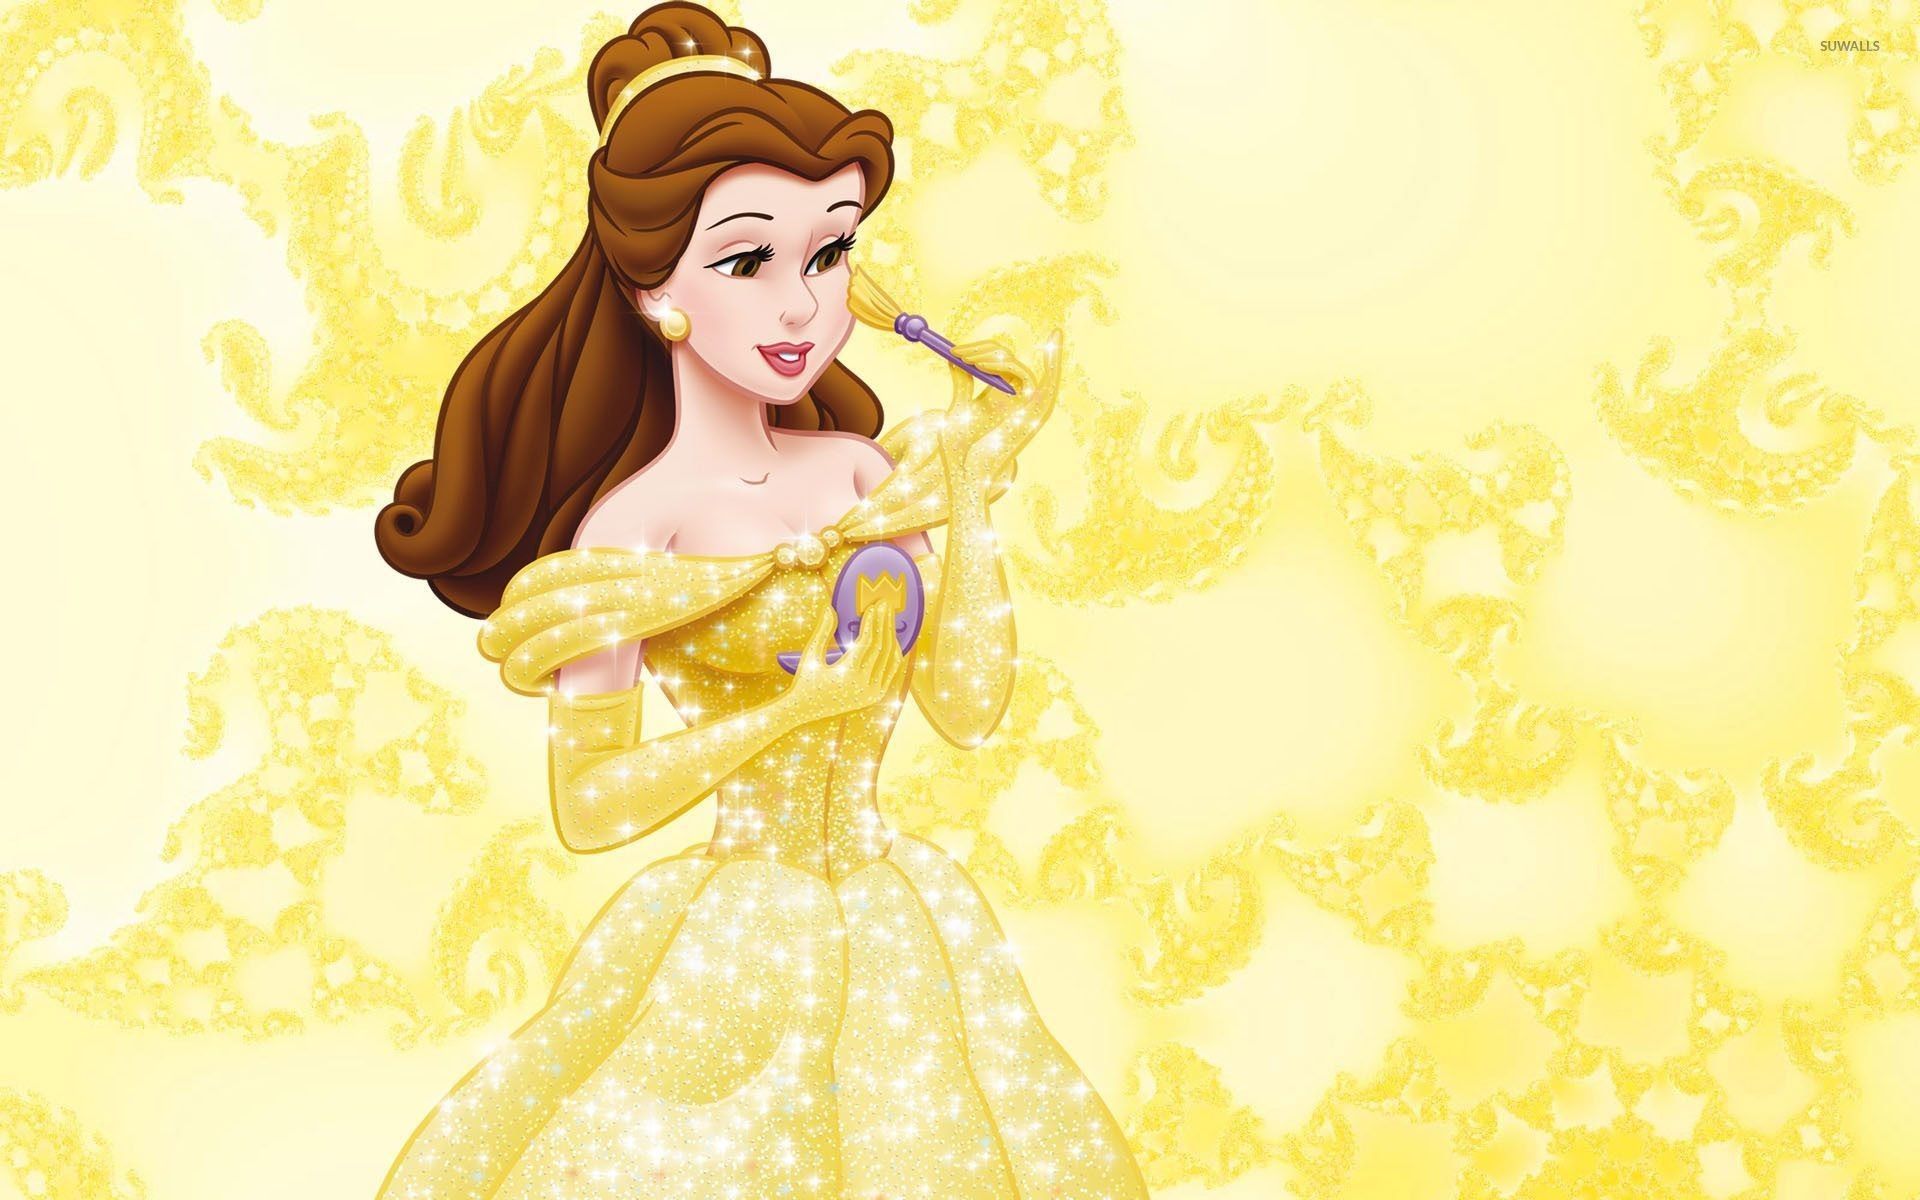 Beauty And The Beast Image Wallpaper For iPhone